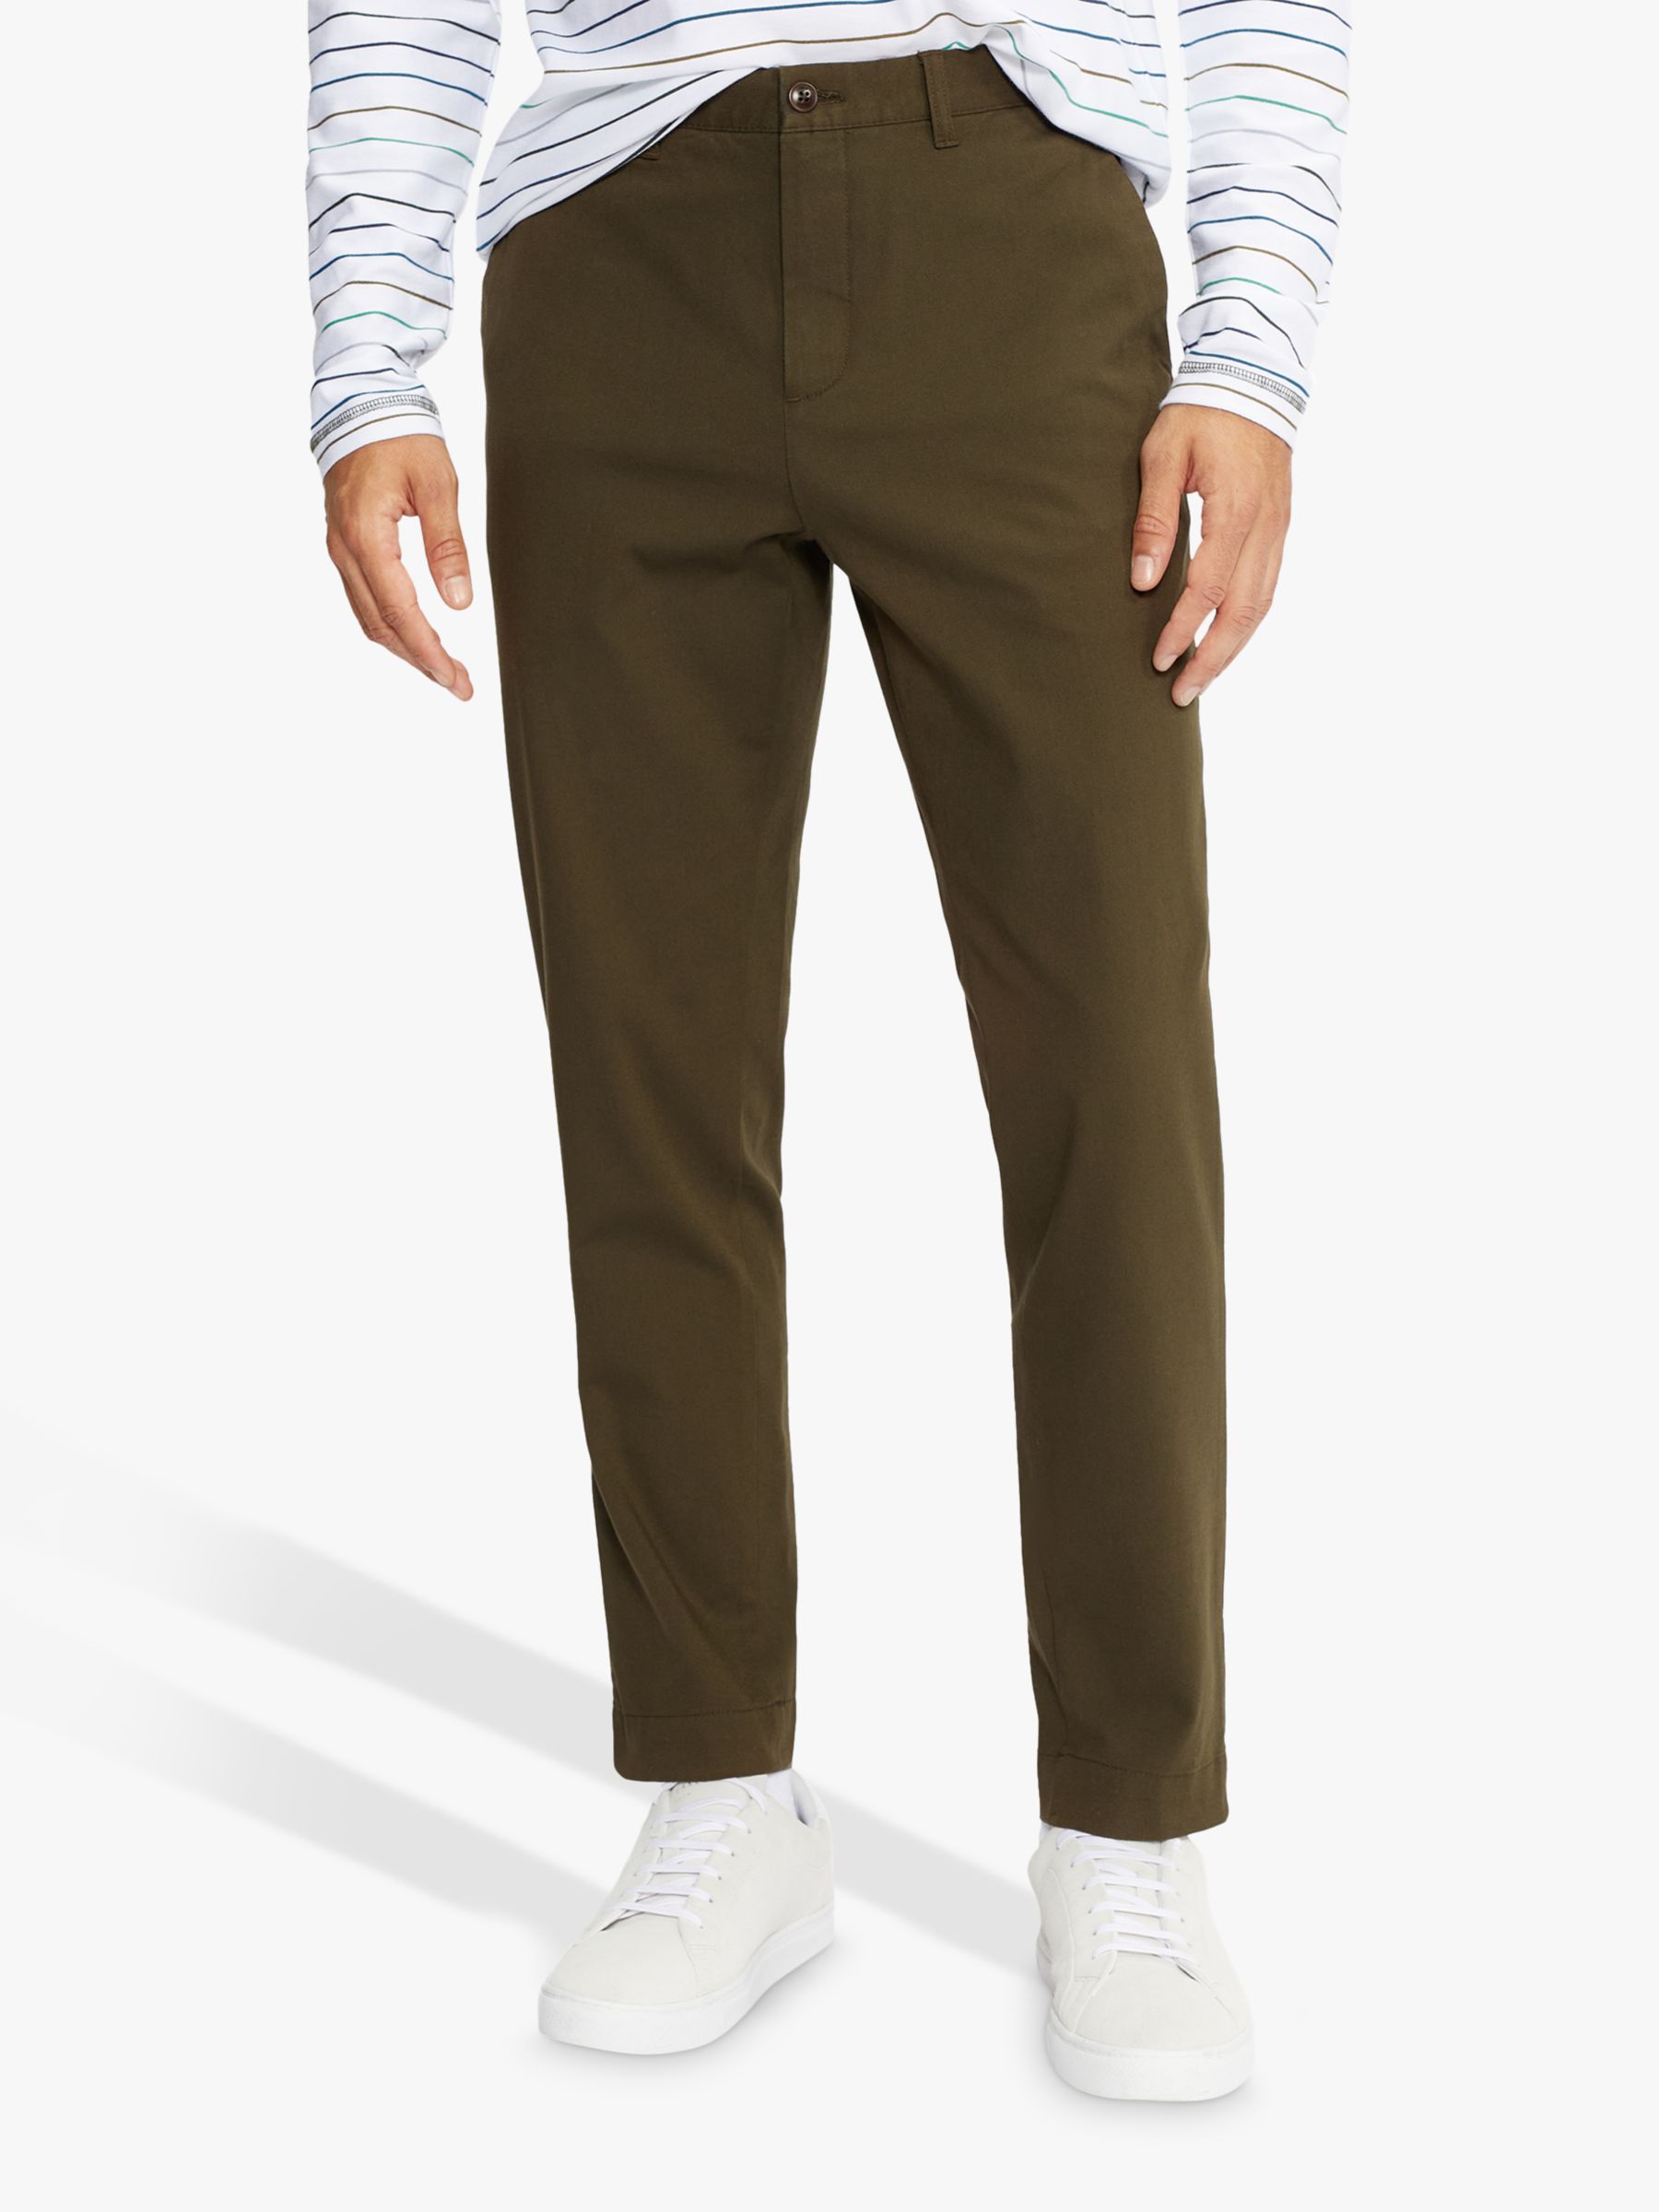 Ted Baker Genbee Cotton Lyocell Chinos, Khaki, 36R